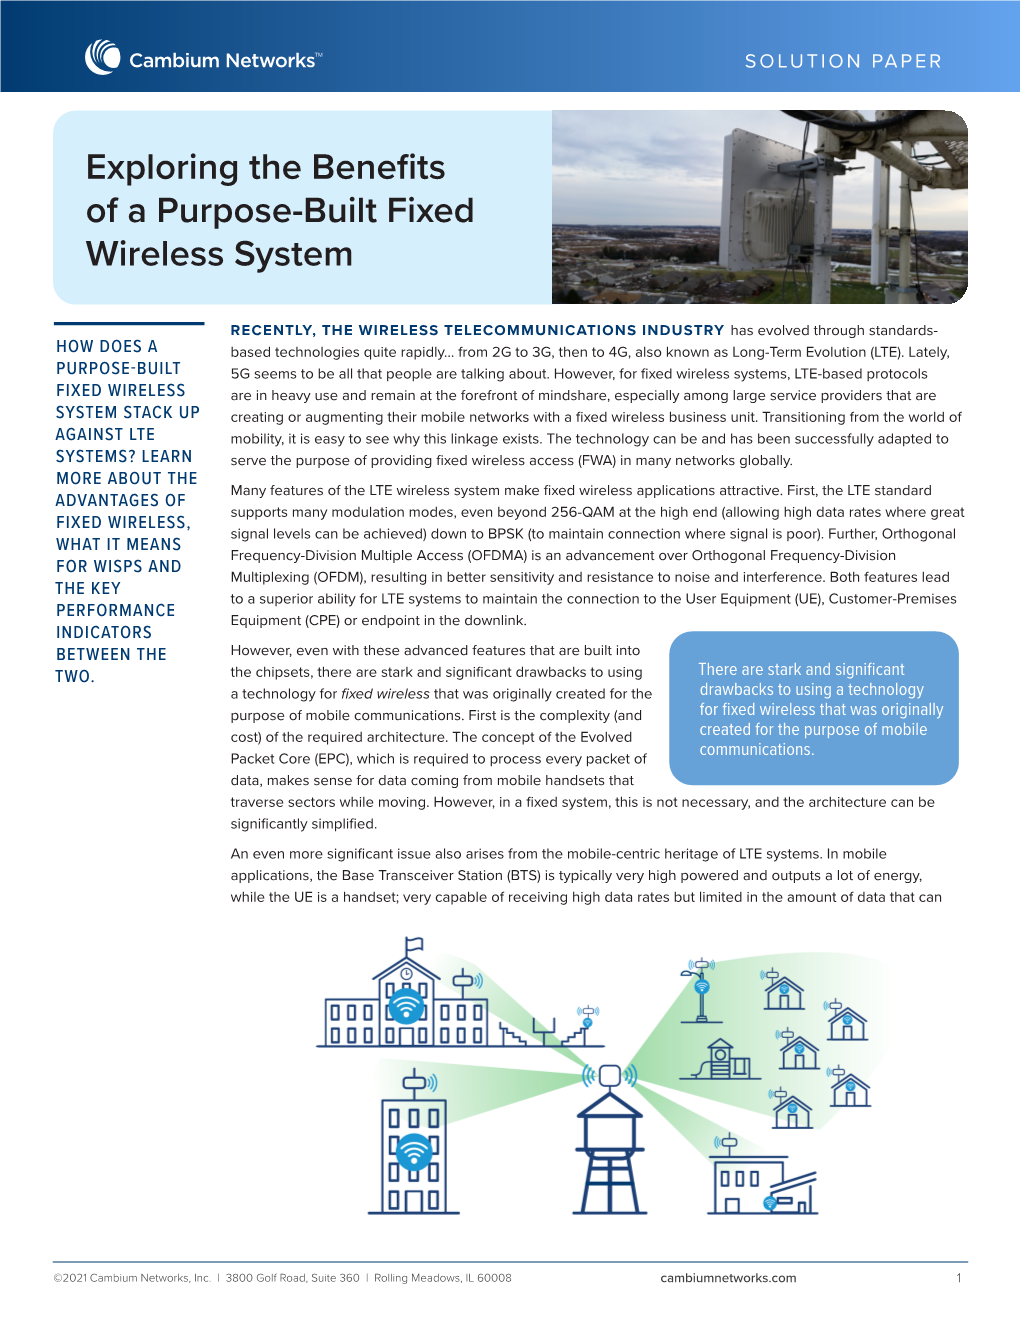 Exploring the Benefits of a Purpose-Built Fixed Wireless System